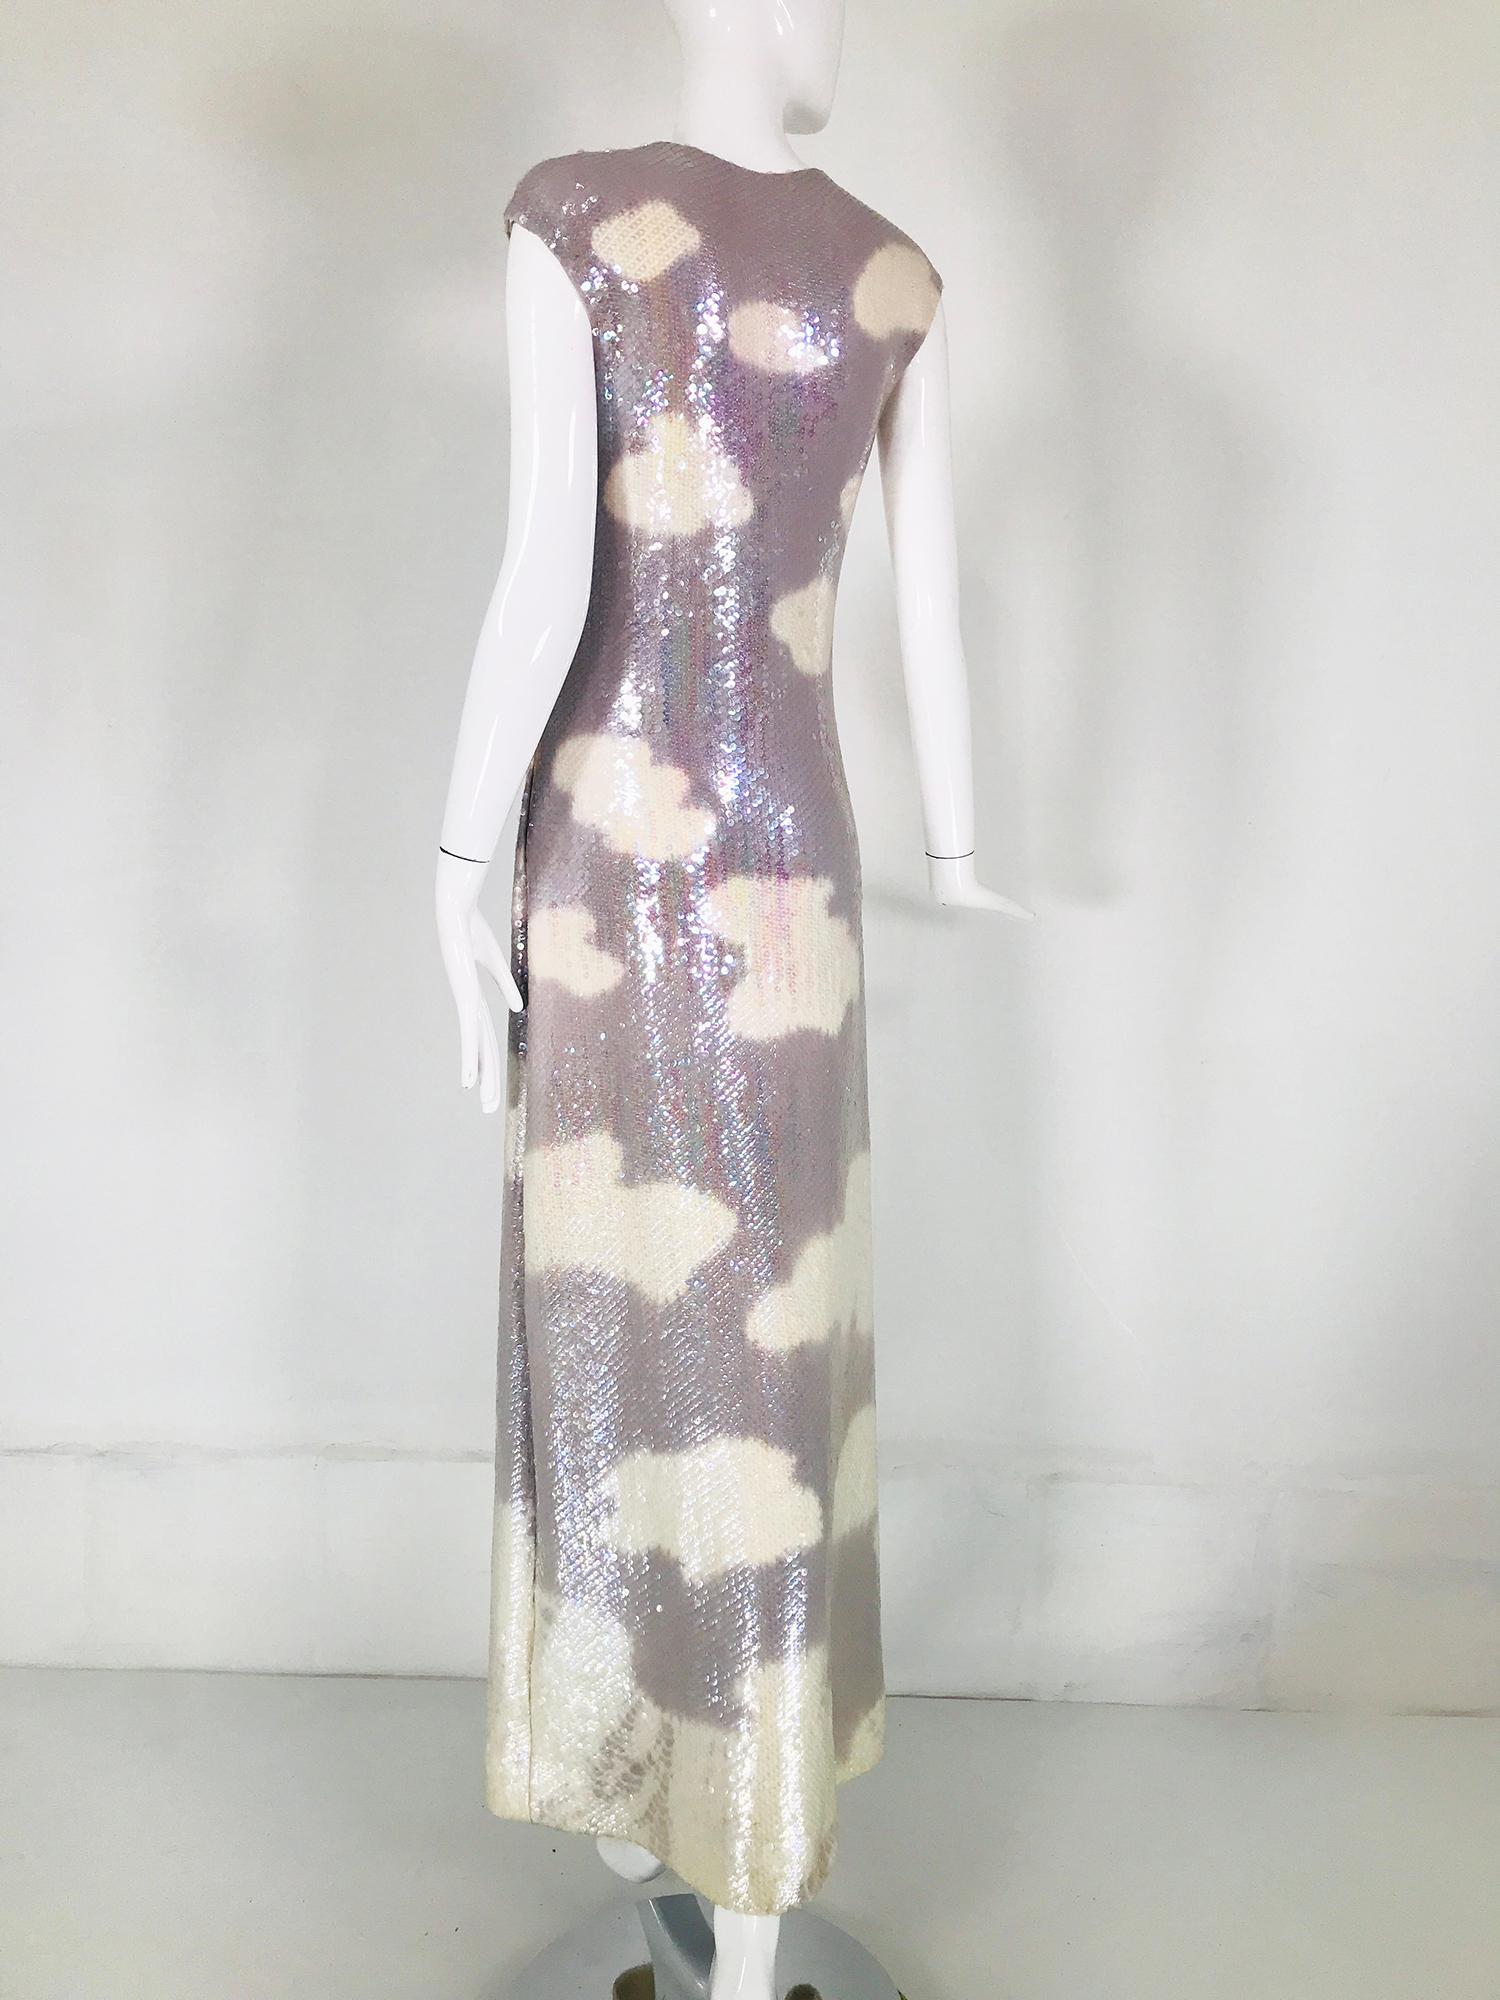 Halston Iconic Clouds Dress in Stormy Grey & Cream Iridescent Sequins Mid 1970s 4